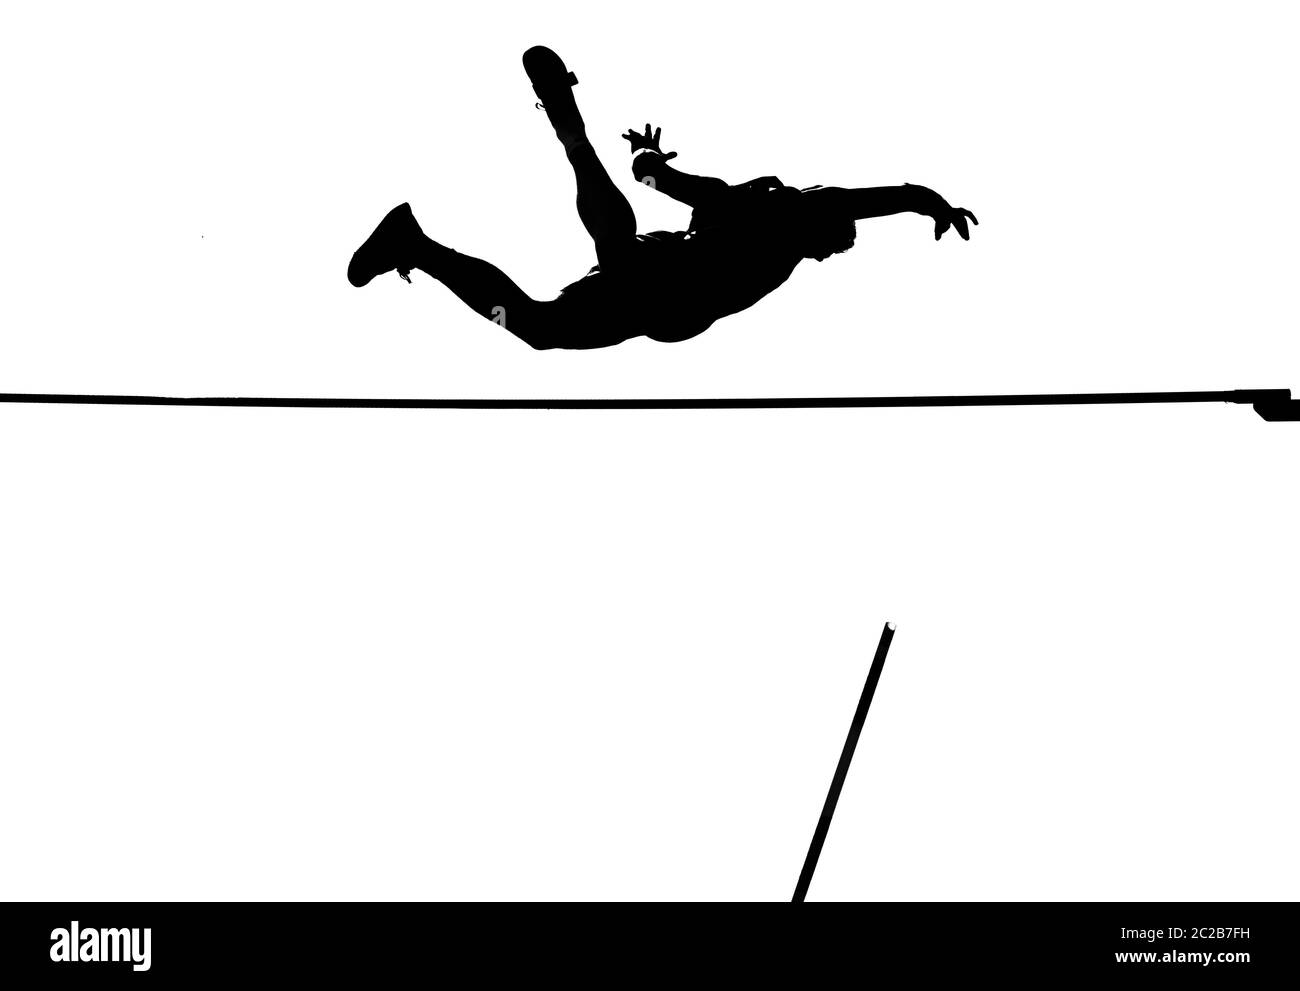 pole vault springer crossing the bar in black and white Stock Photo